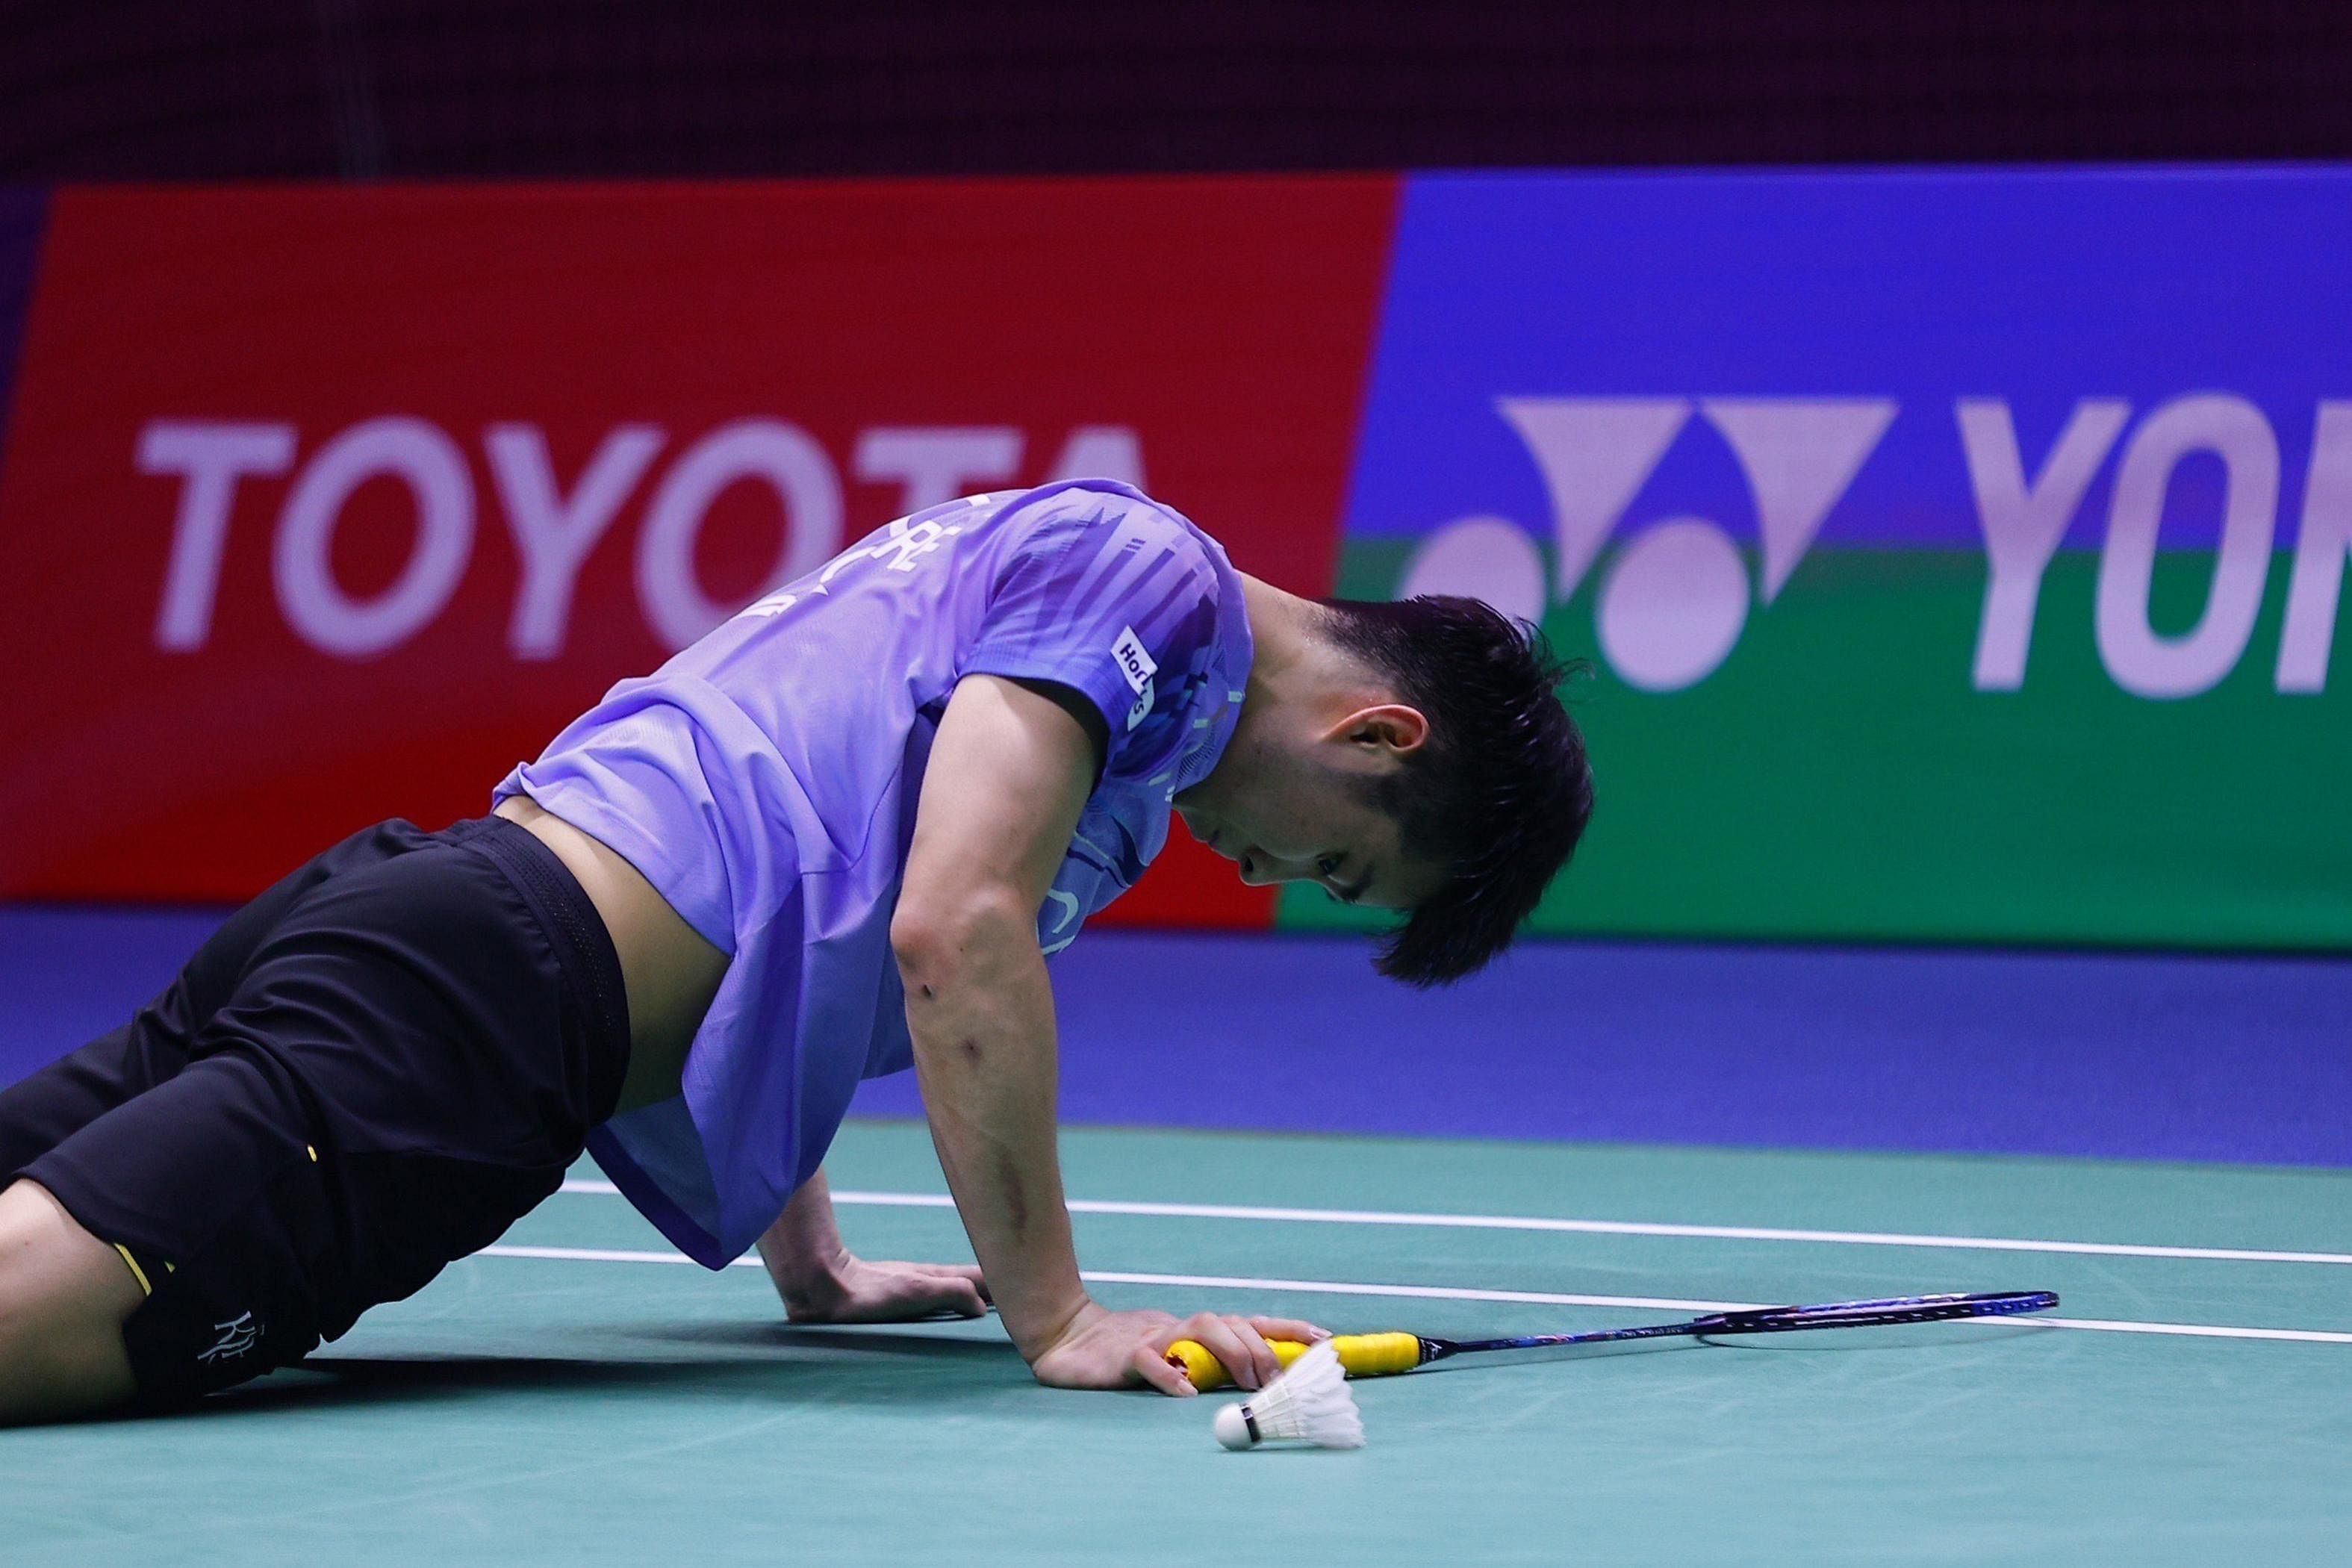 Loh Kean Yew’s French Open run ends with quarter-final loss to Lakshya Sen